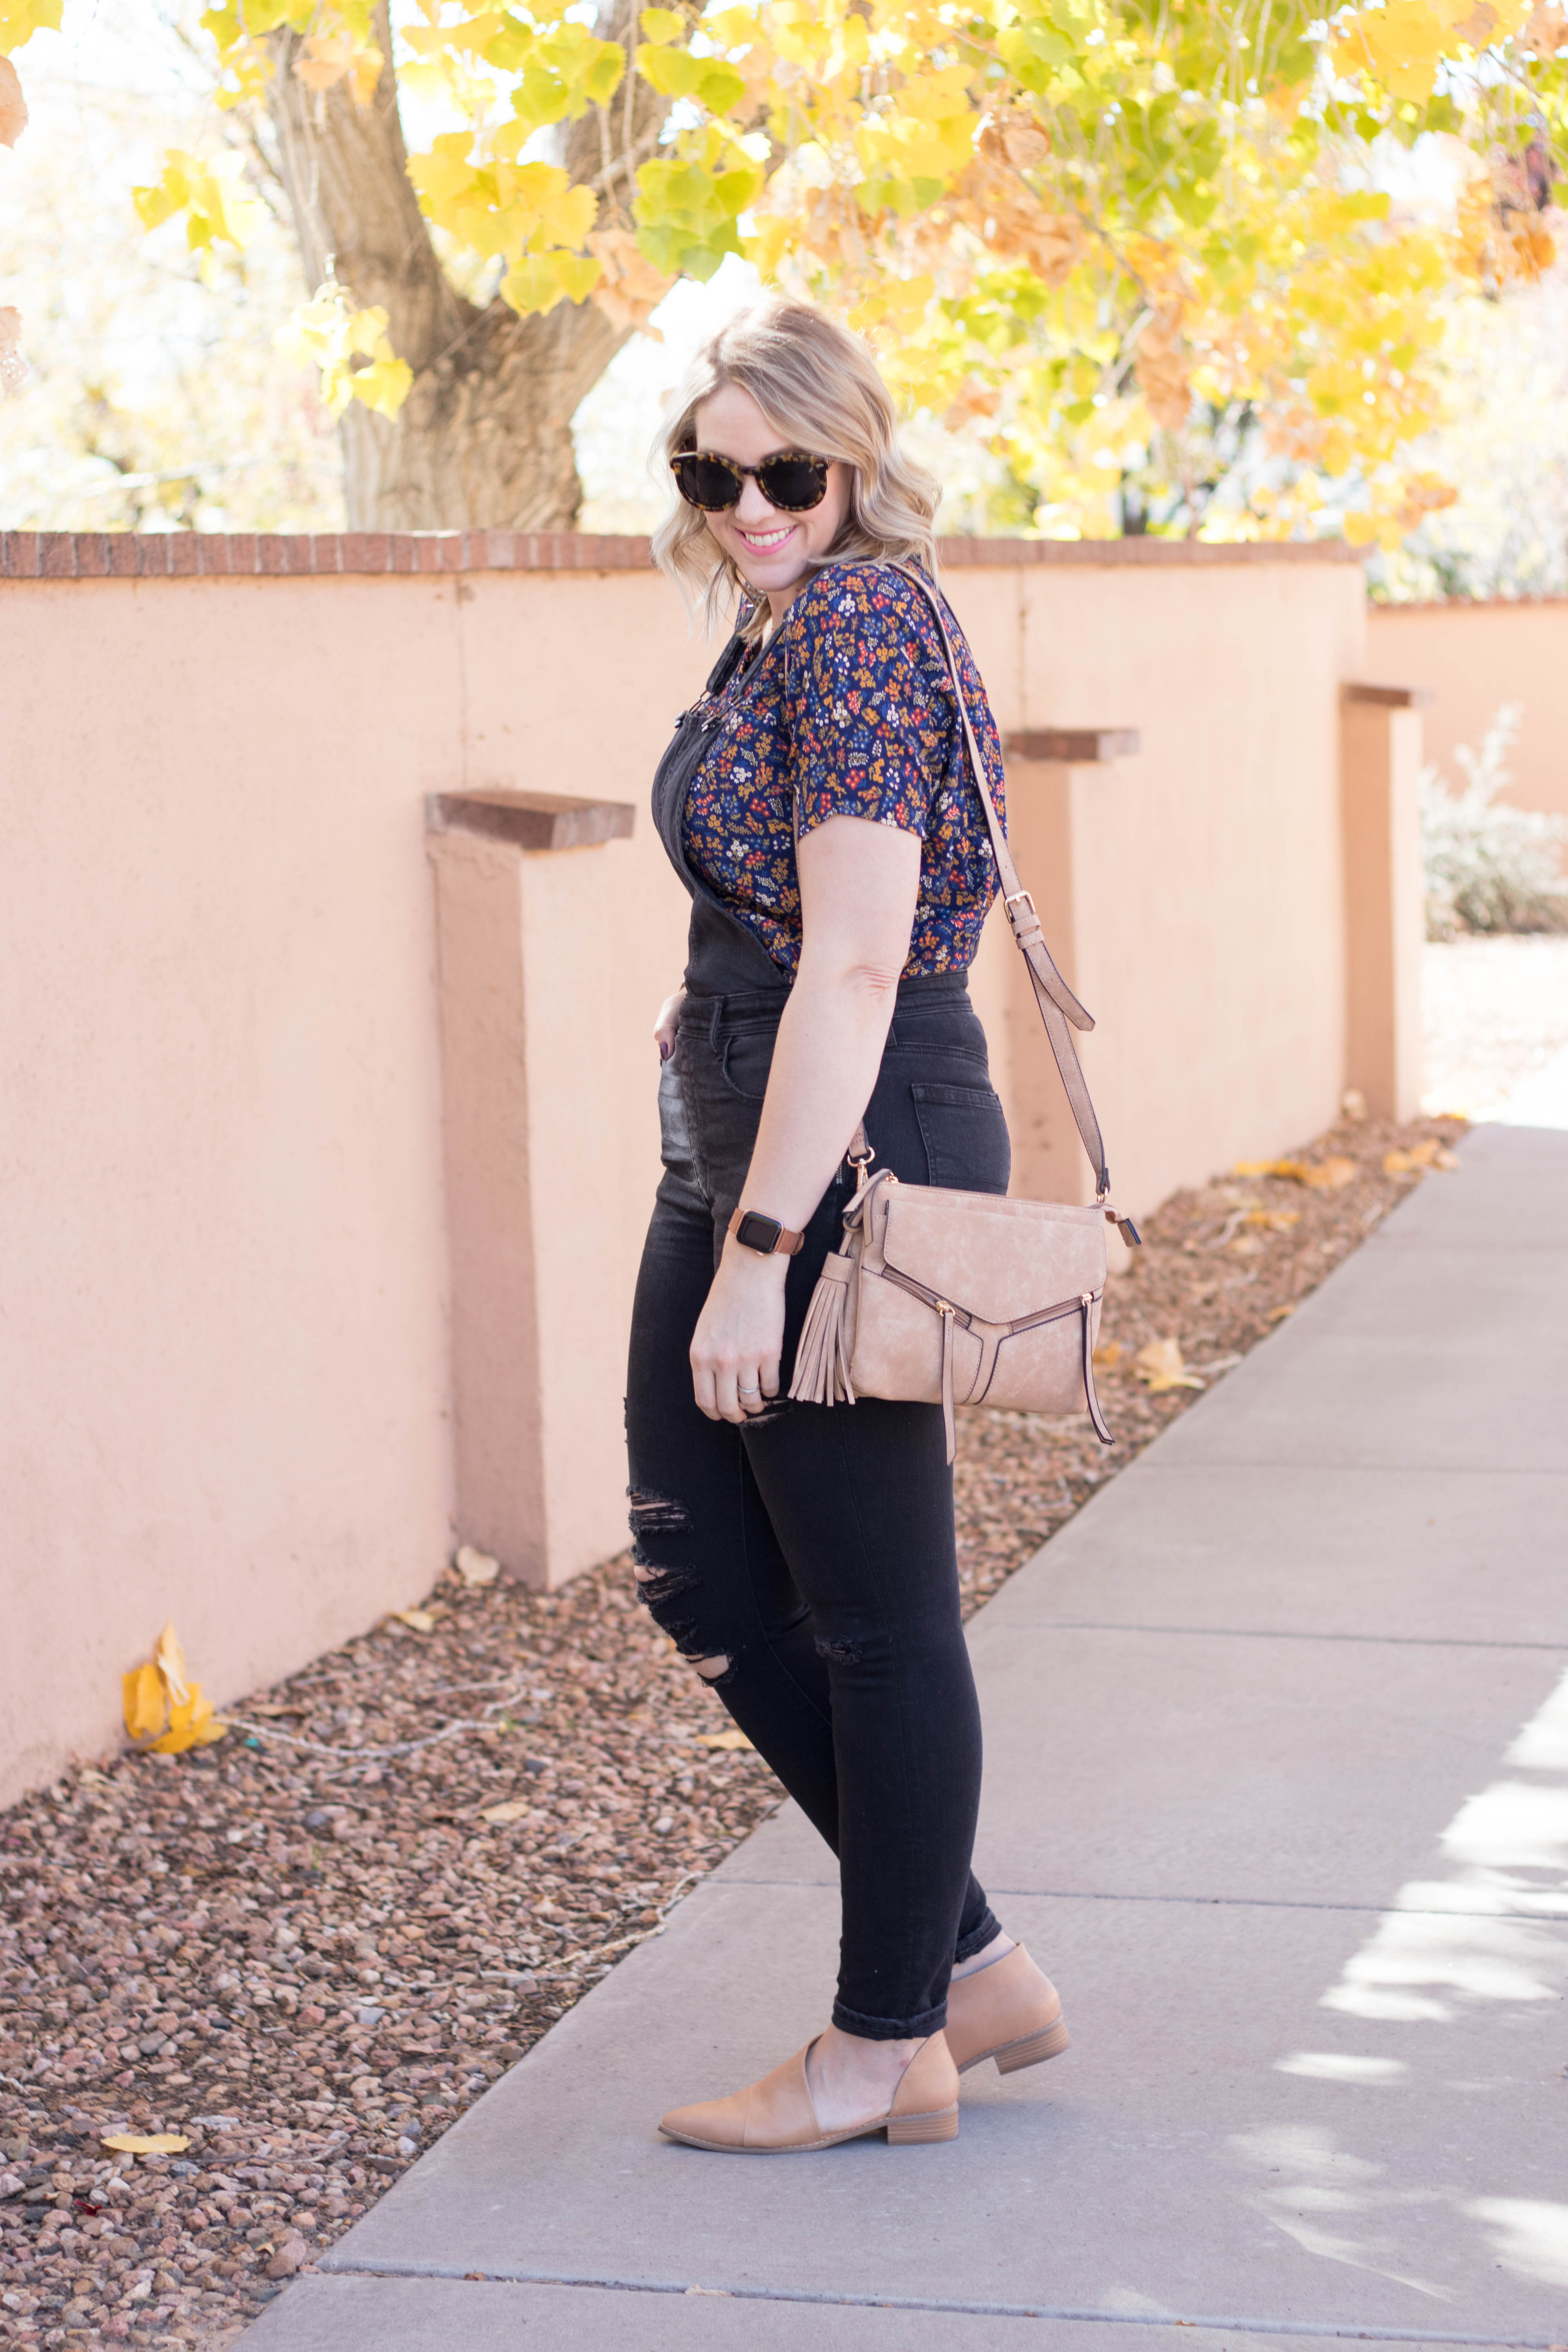 how to style overalls for fall #fallfashion #overalls #theweeklystyleedit